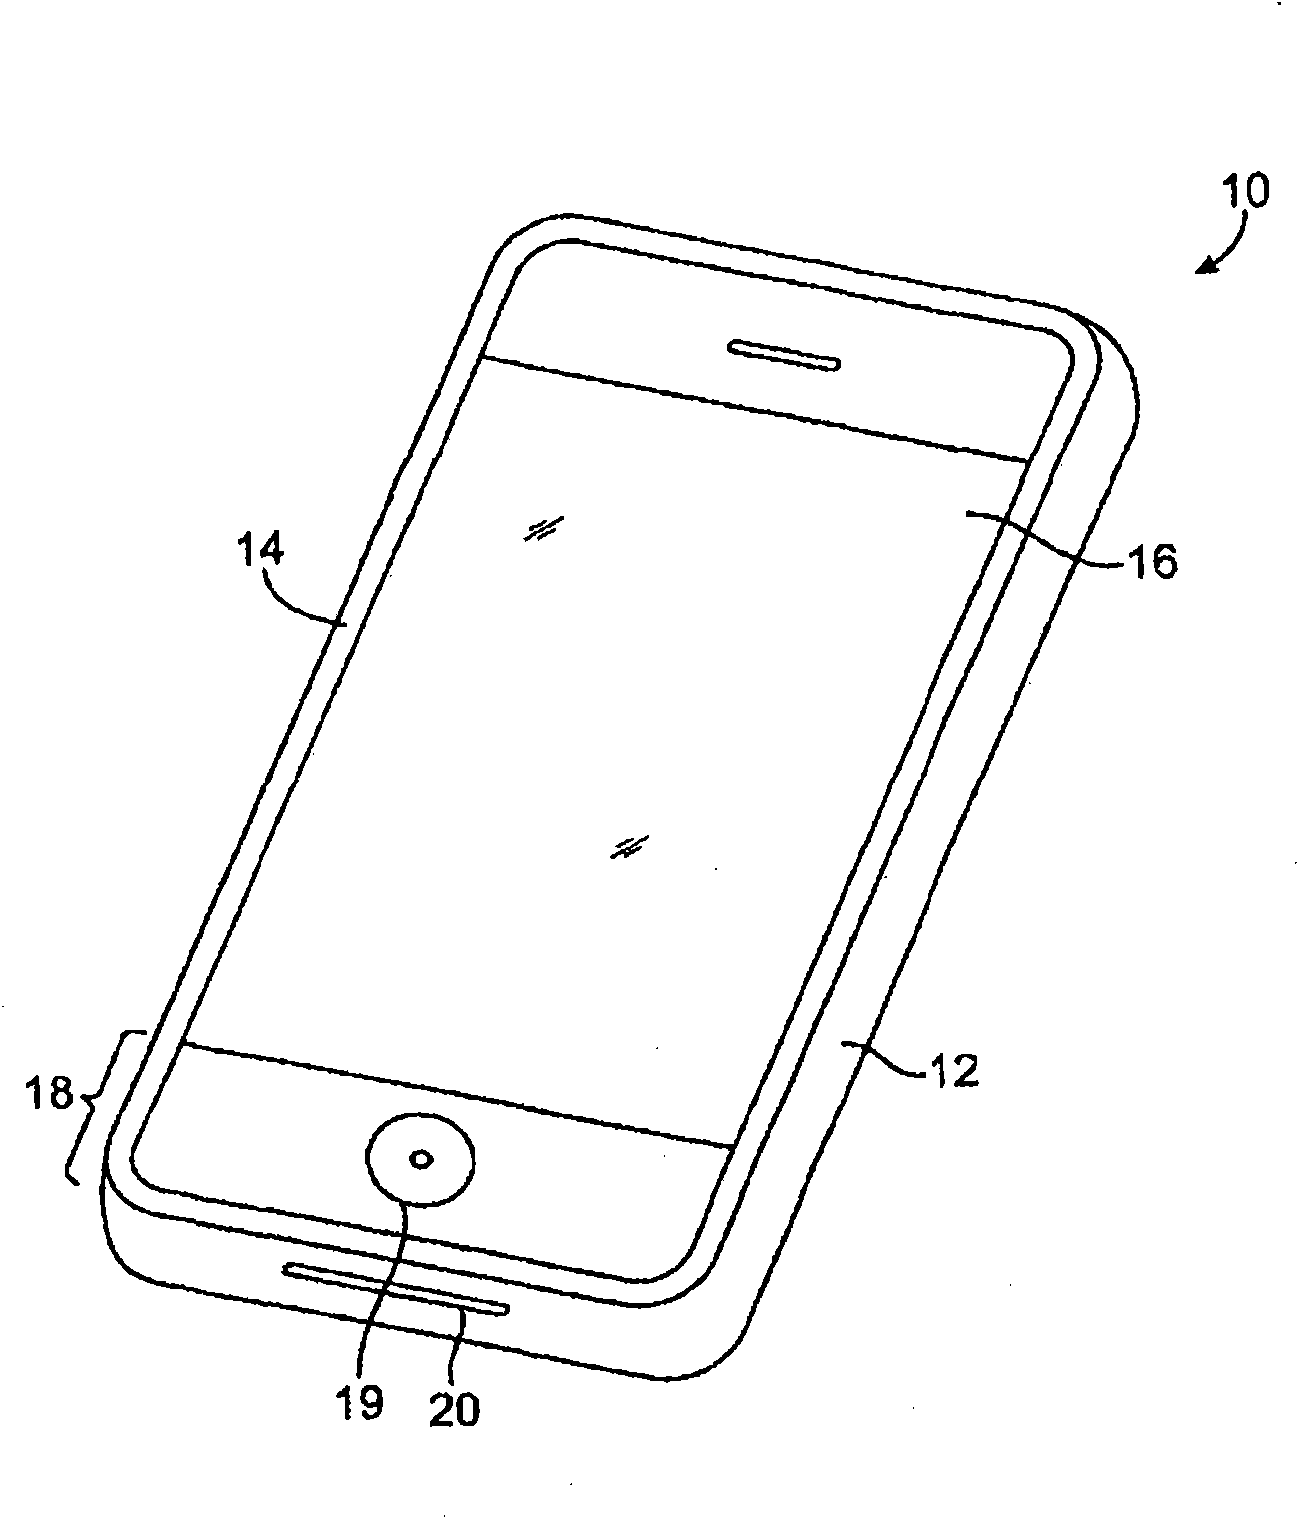 Antennas for handheld electronic devices with conductive bezels